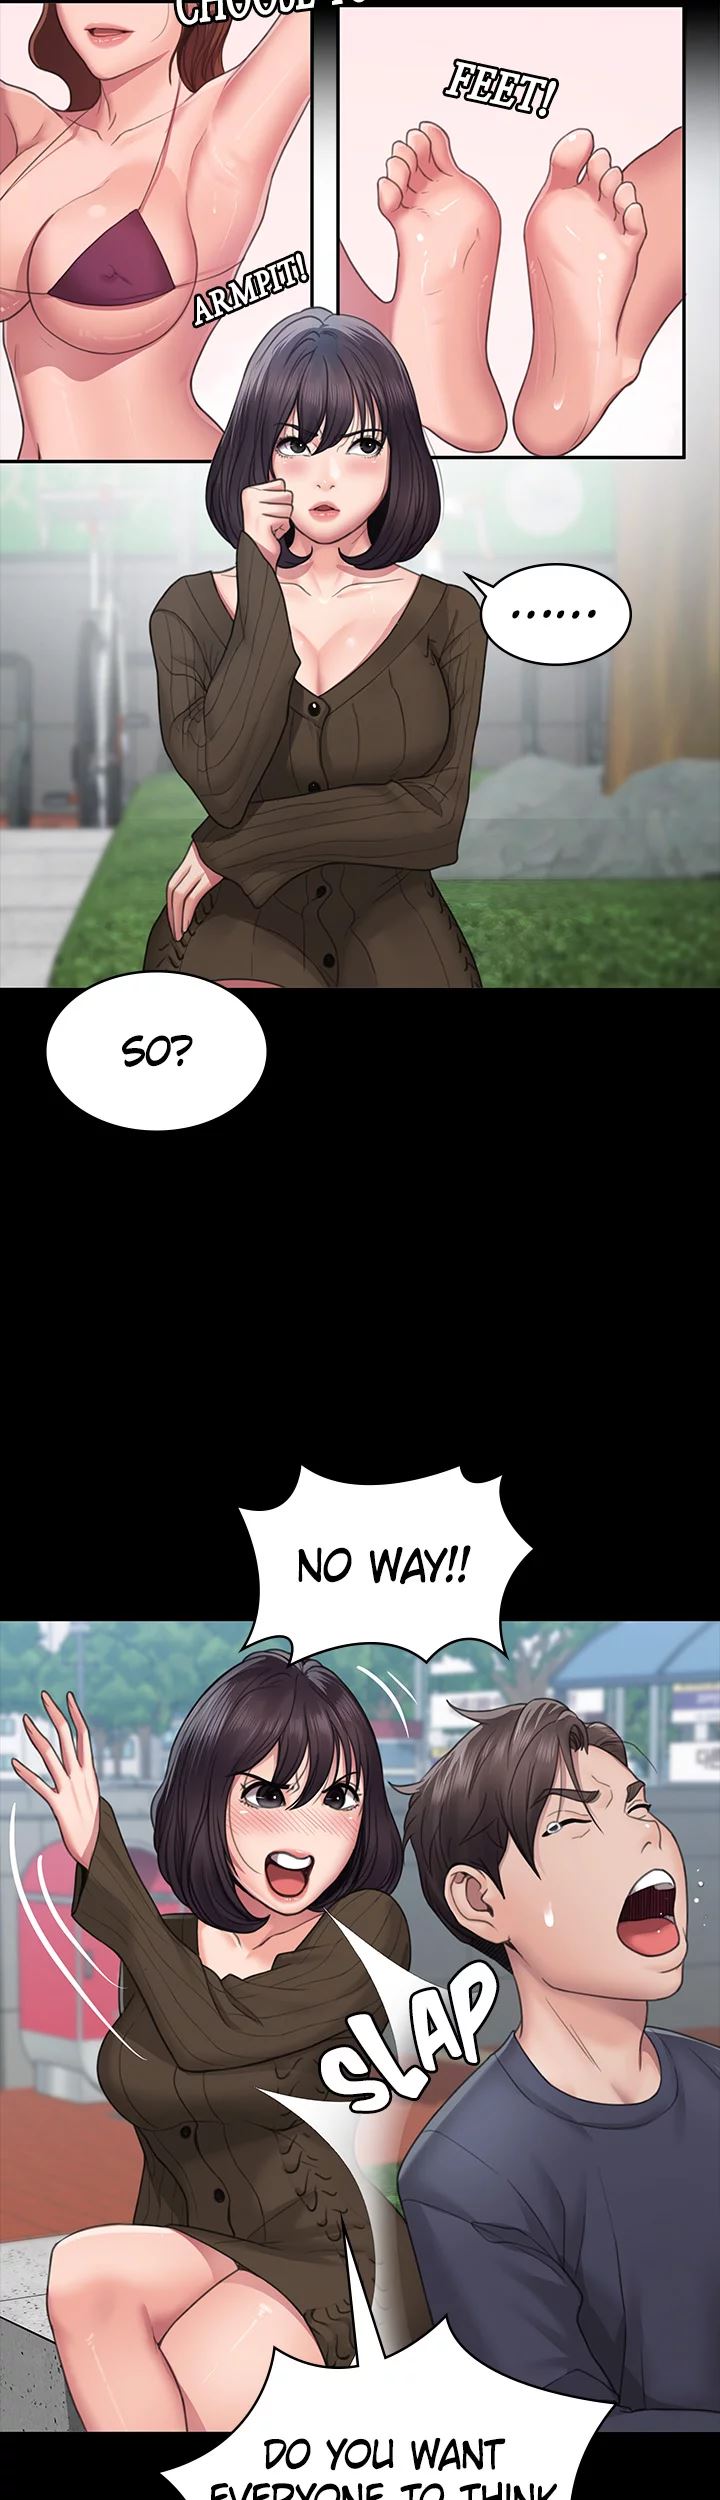 Bully Girl - Chapter 11 Page 23